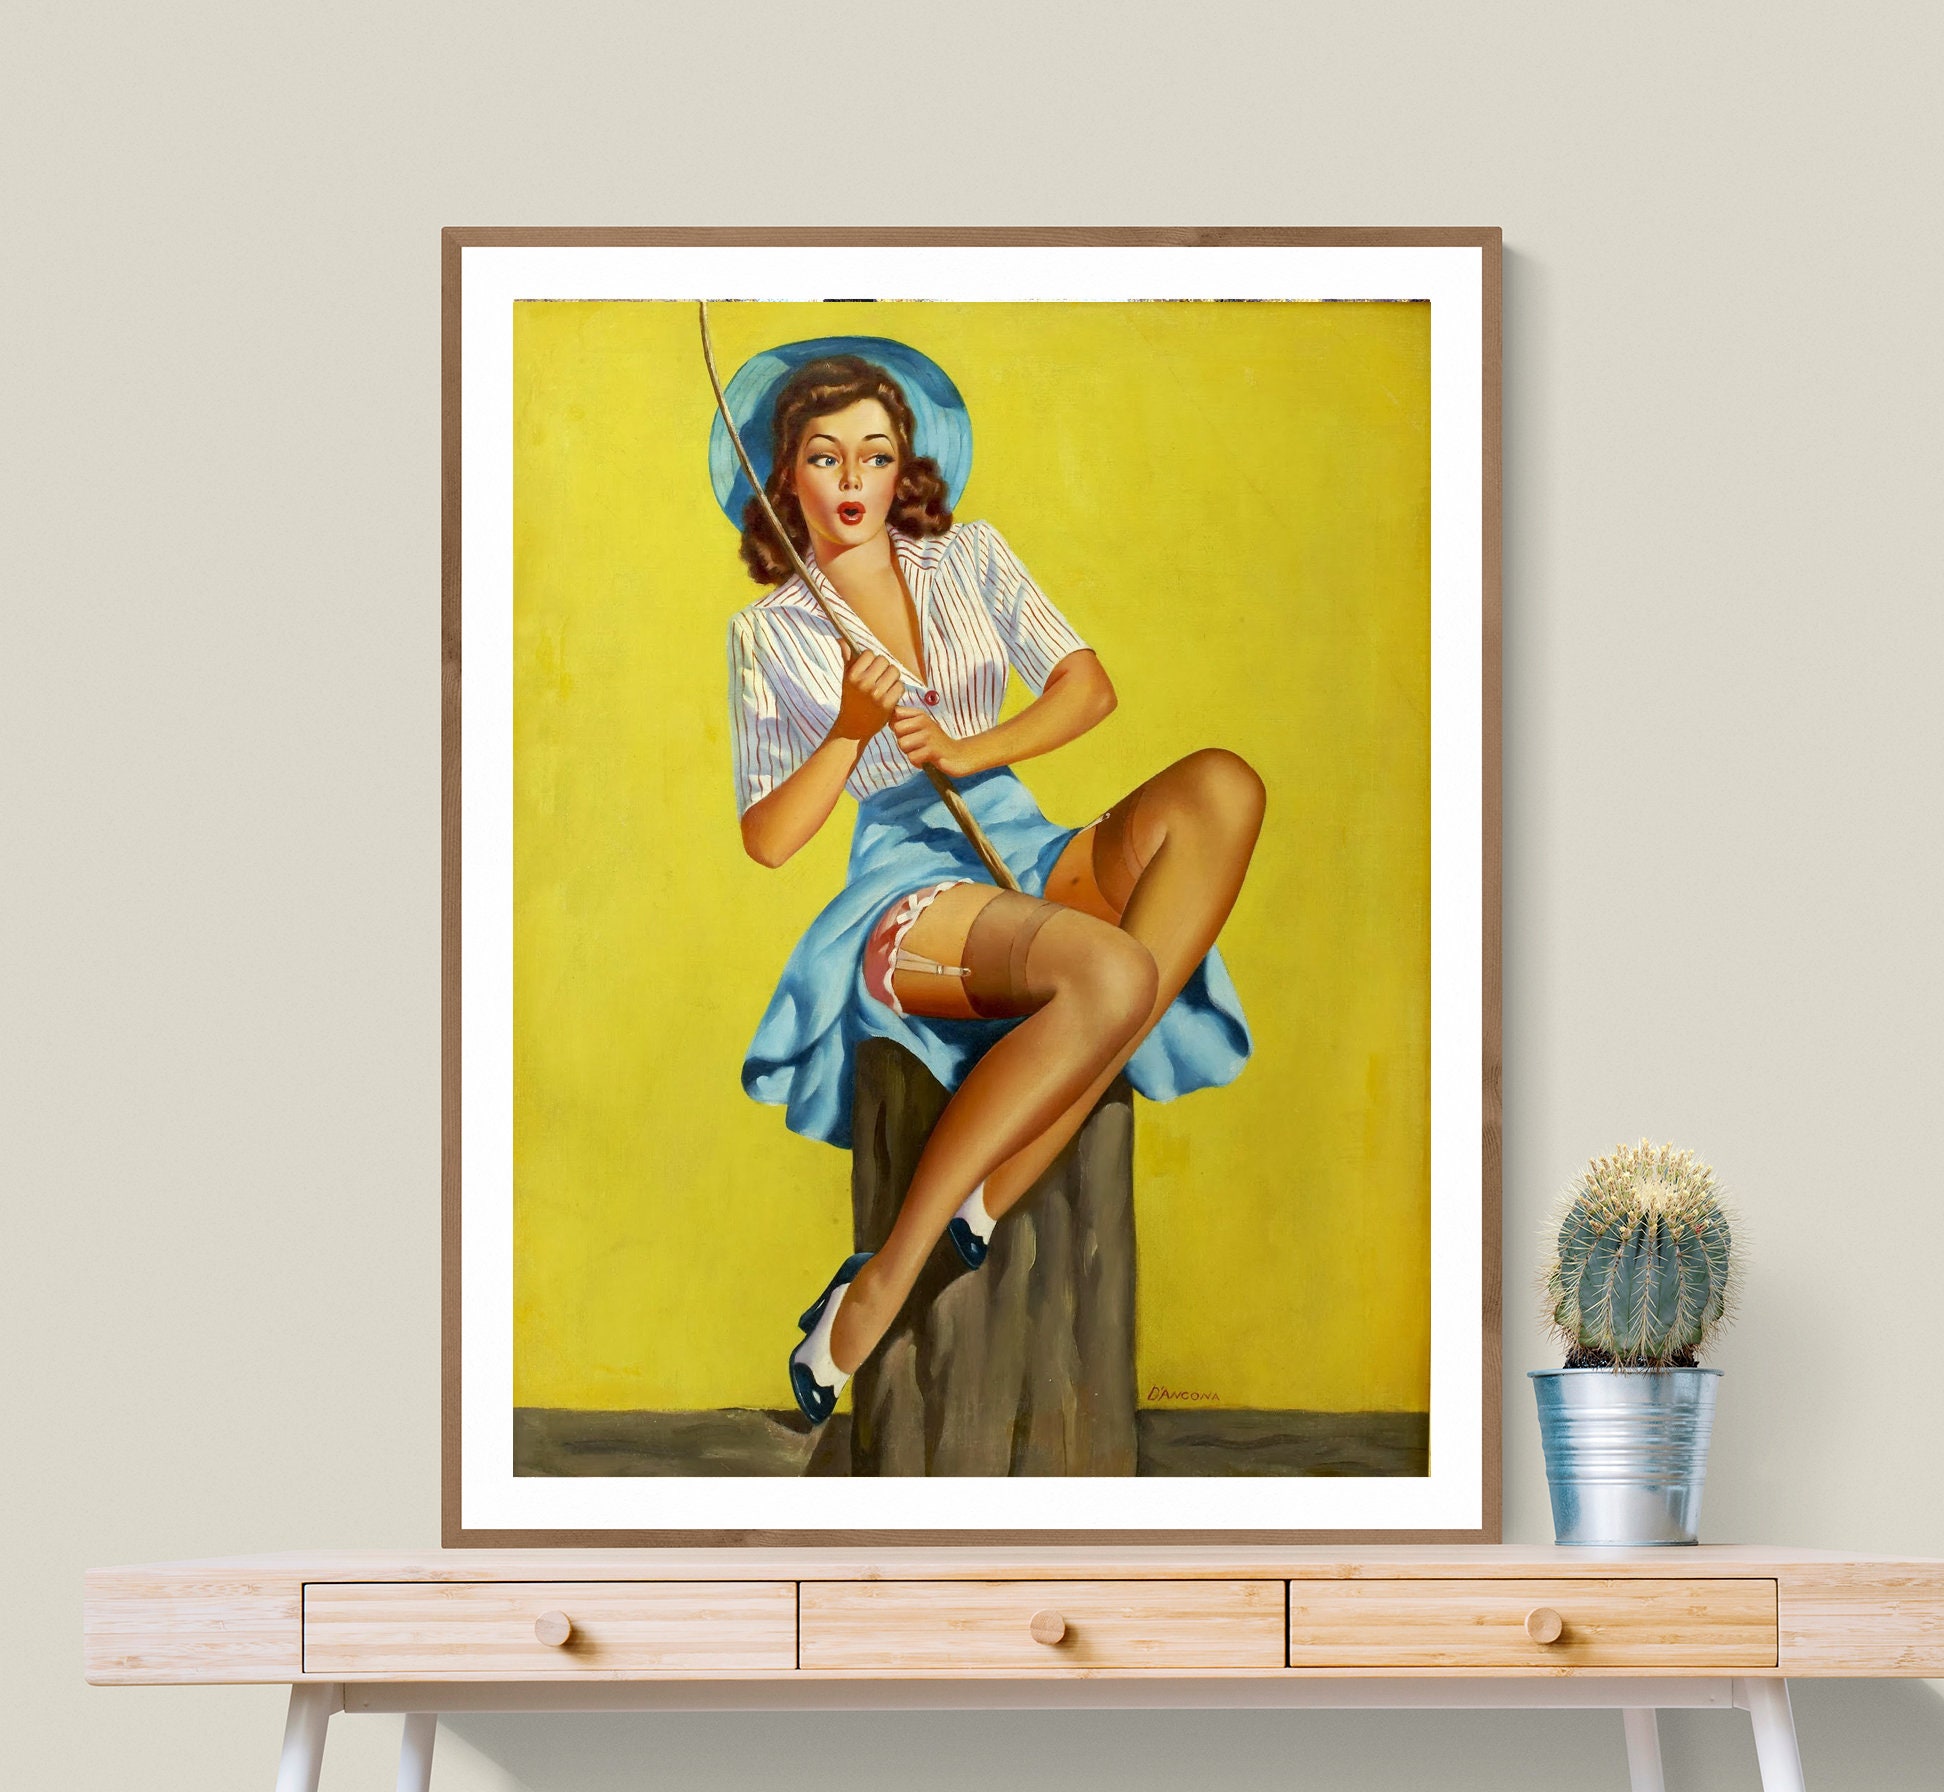 Vintage Fishing Pin Up Girl Poster A3/A4 Print